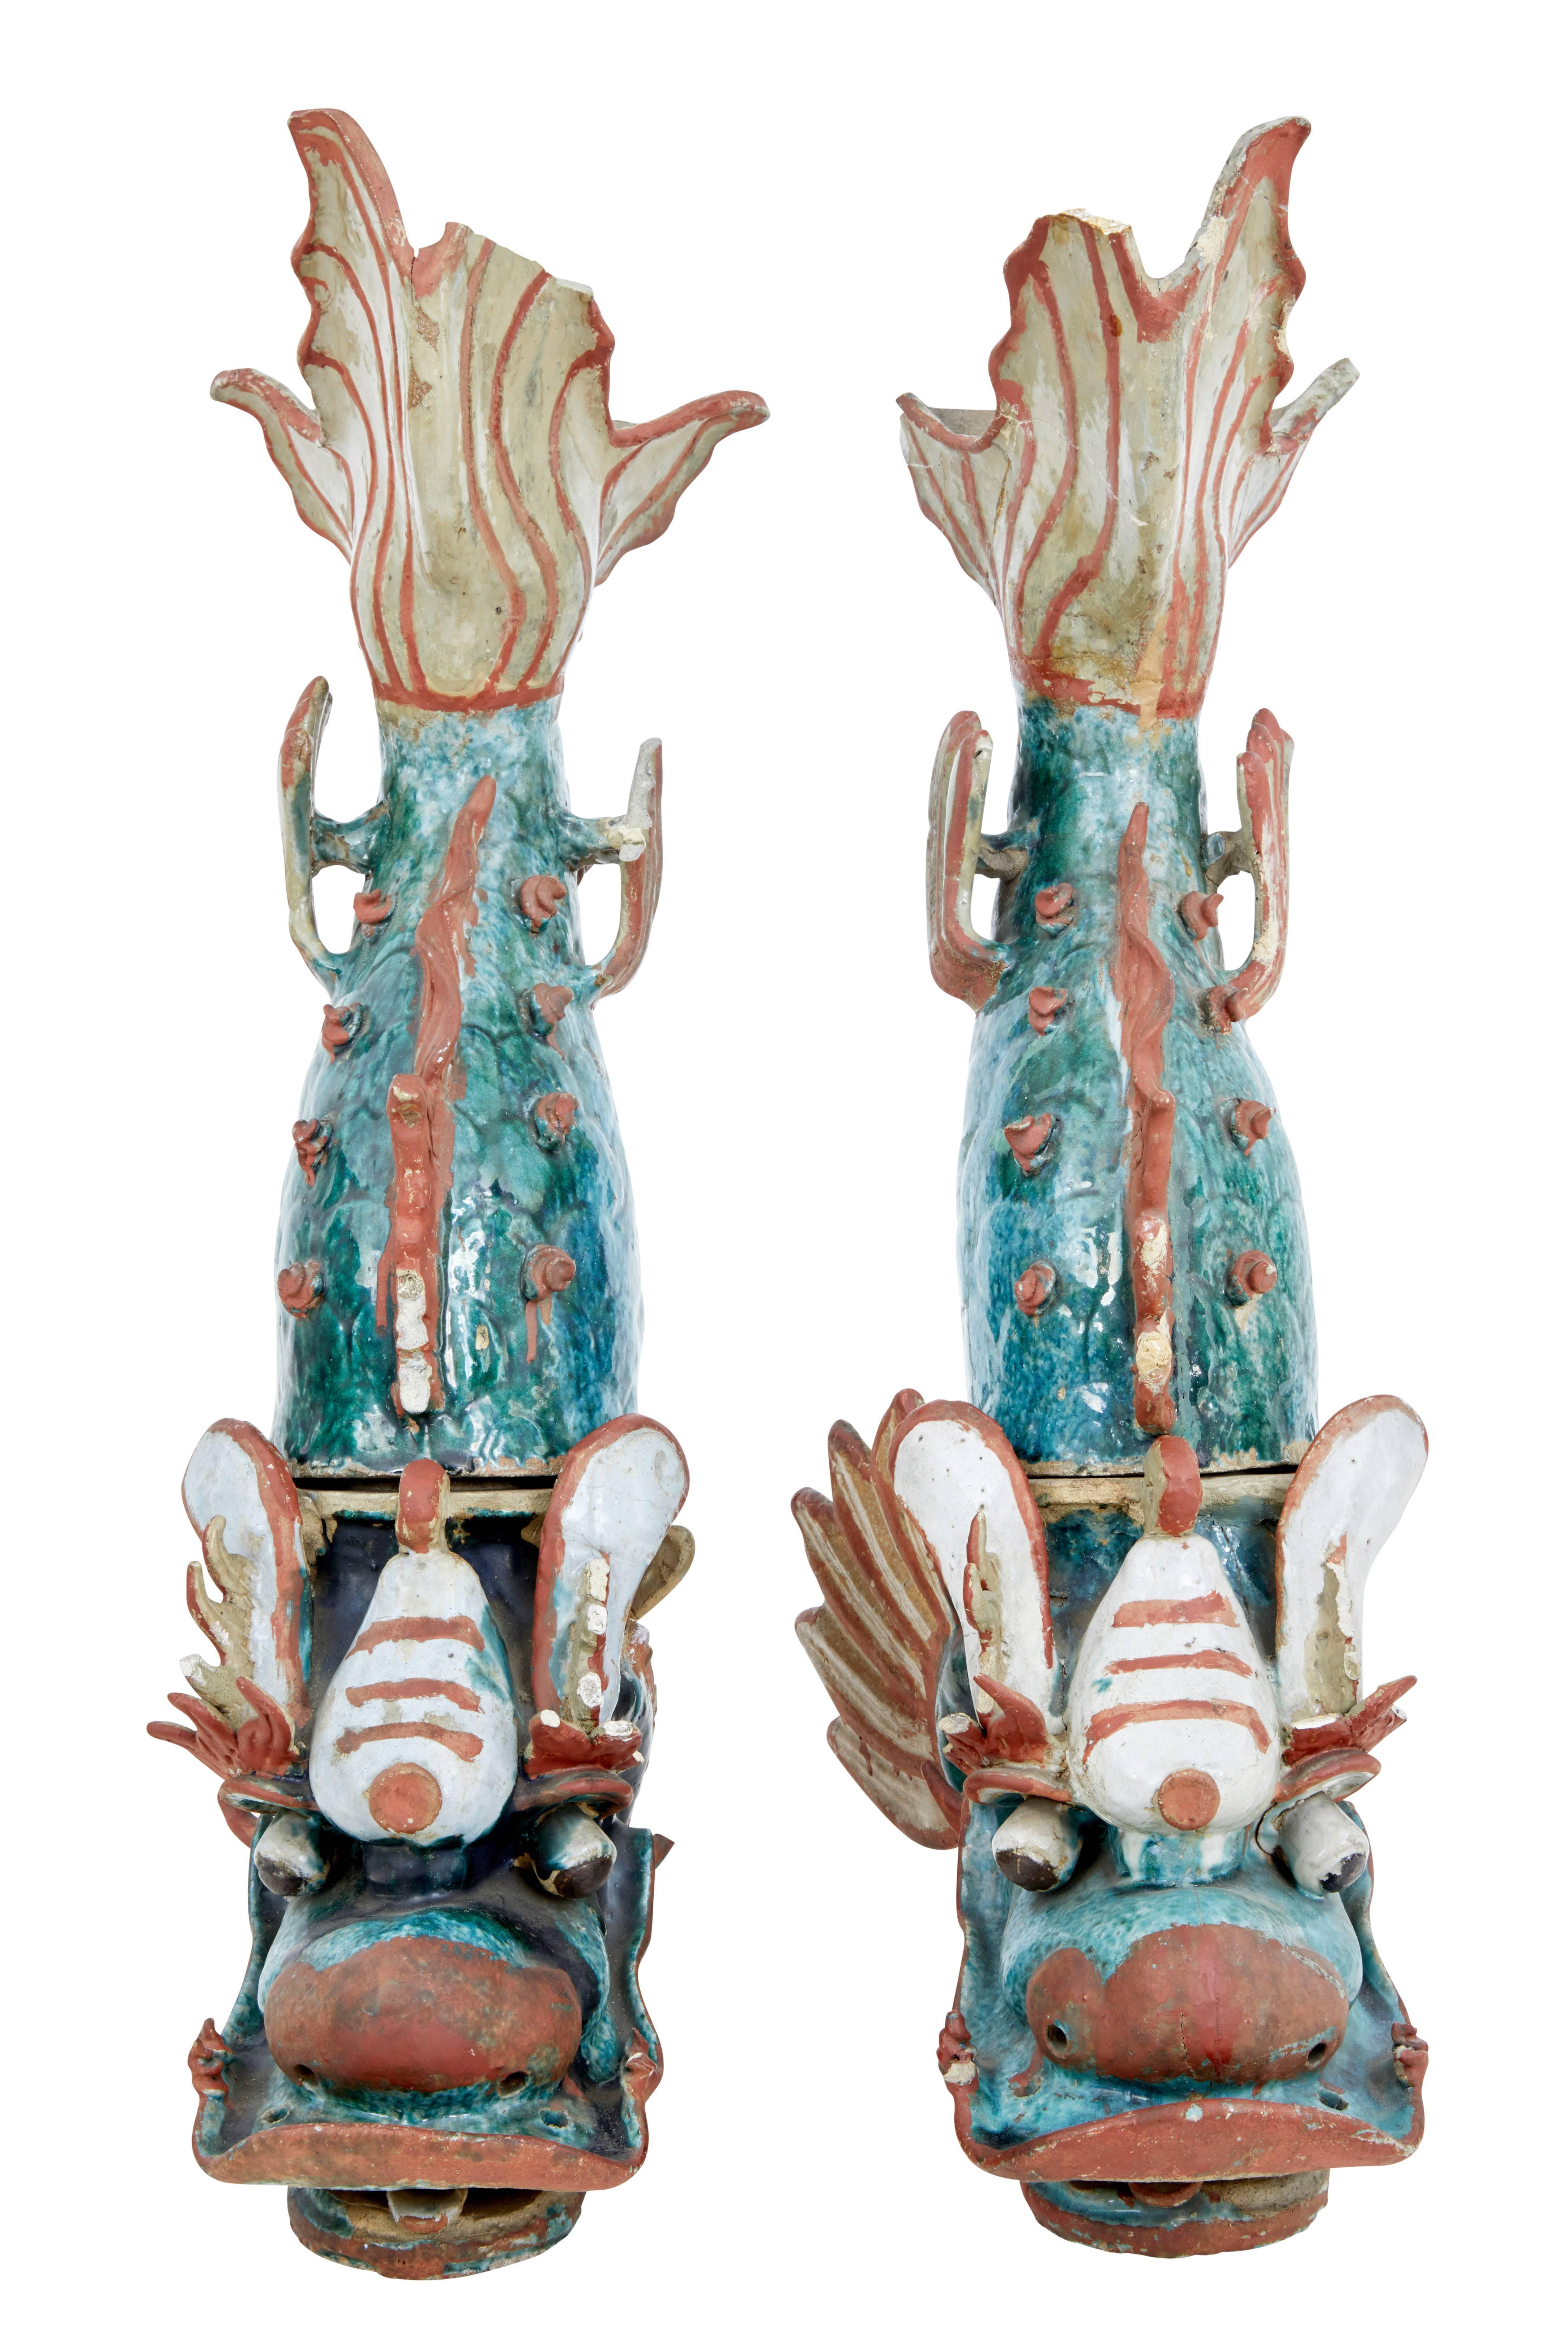 Striking pair of 19th century shachikoko roof ornaments, circa 1880.

These appear to be 'makara' sea monsters still retaining their bold colors.

Both are made from two sections and would have been originally nailed to the roof.

Because of